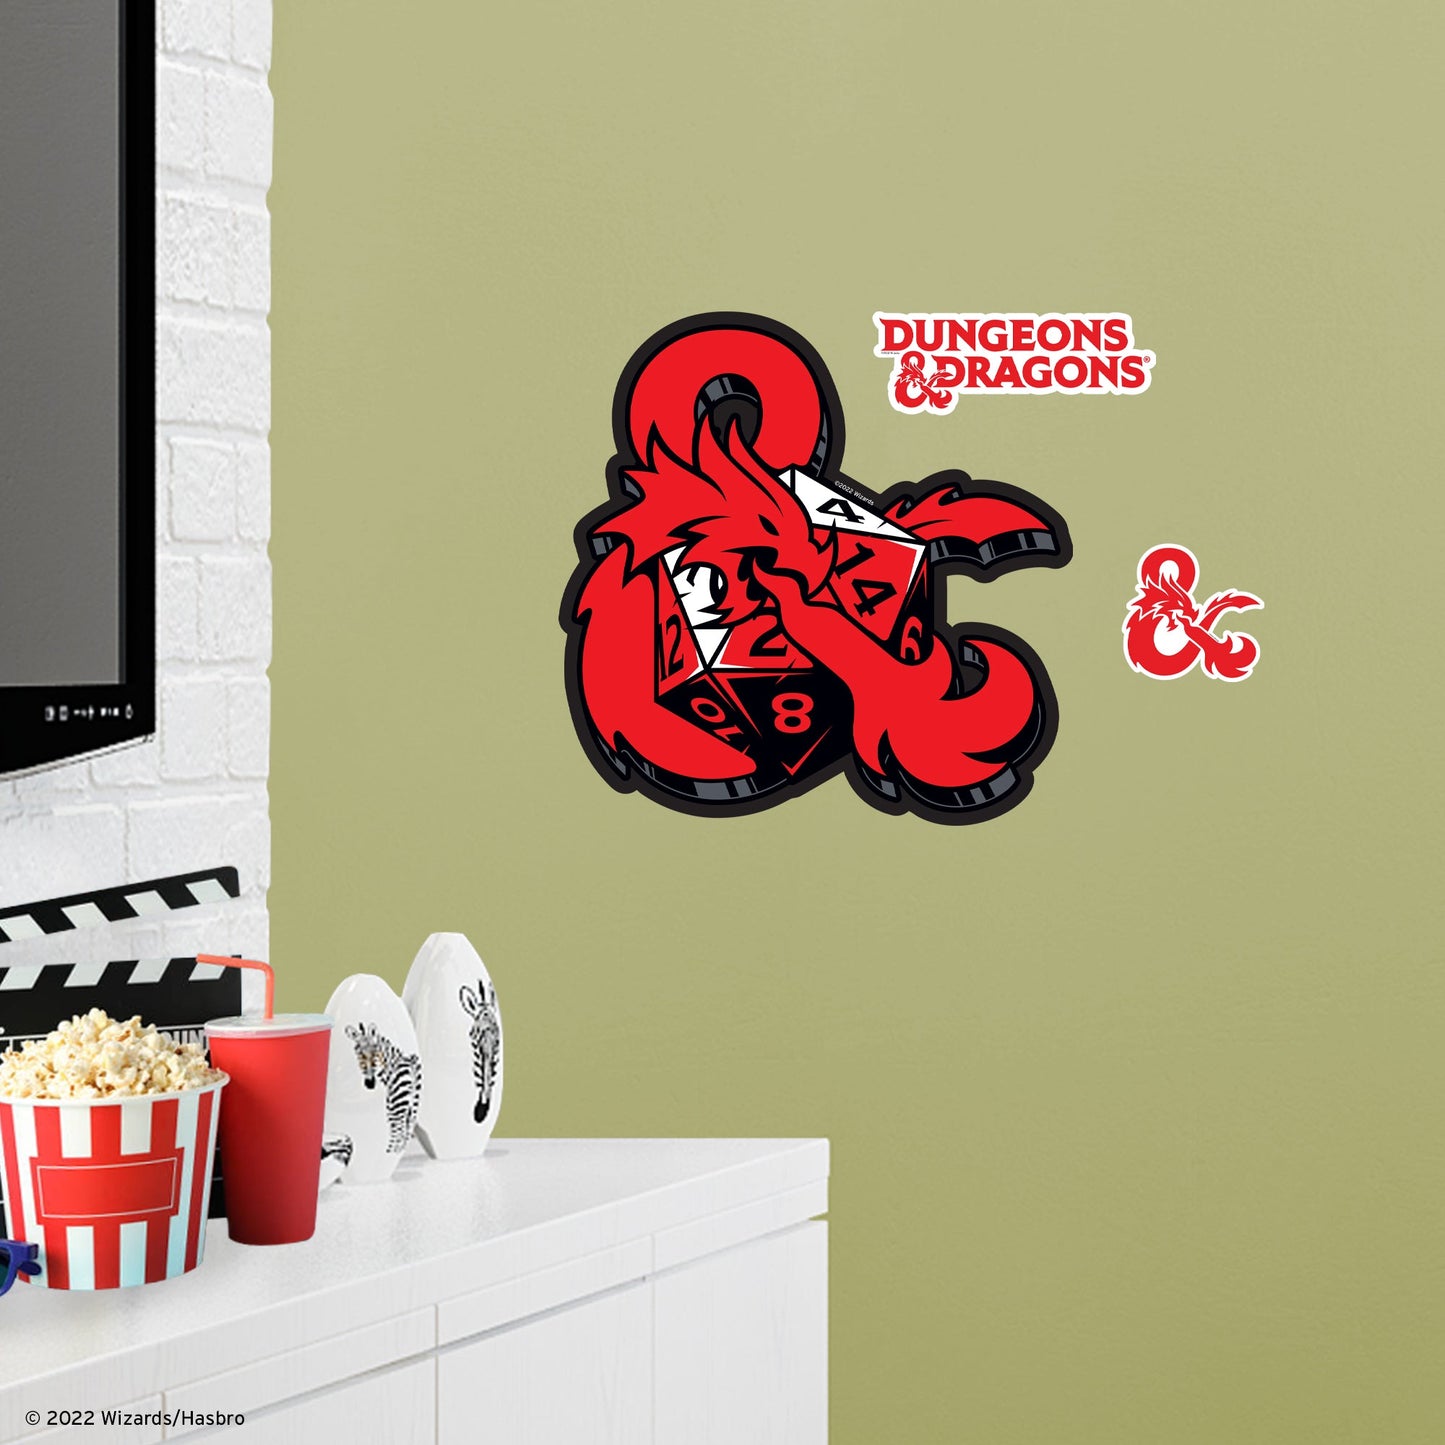 Dungeons & Dragons: D20 ampersand Icon - Officially Licensed Hasbro Removable Adhesive Decal